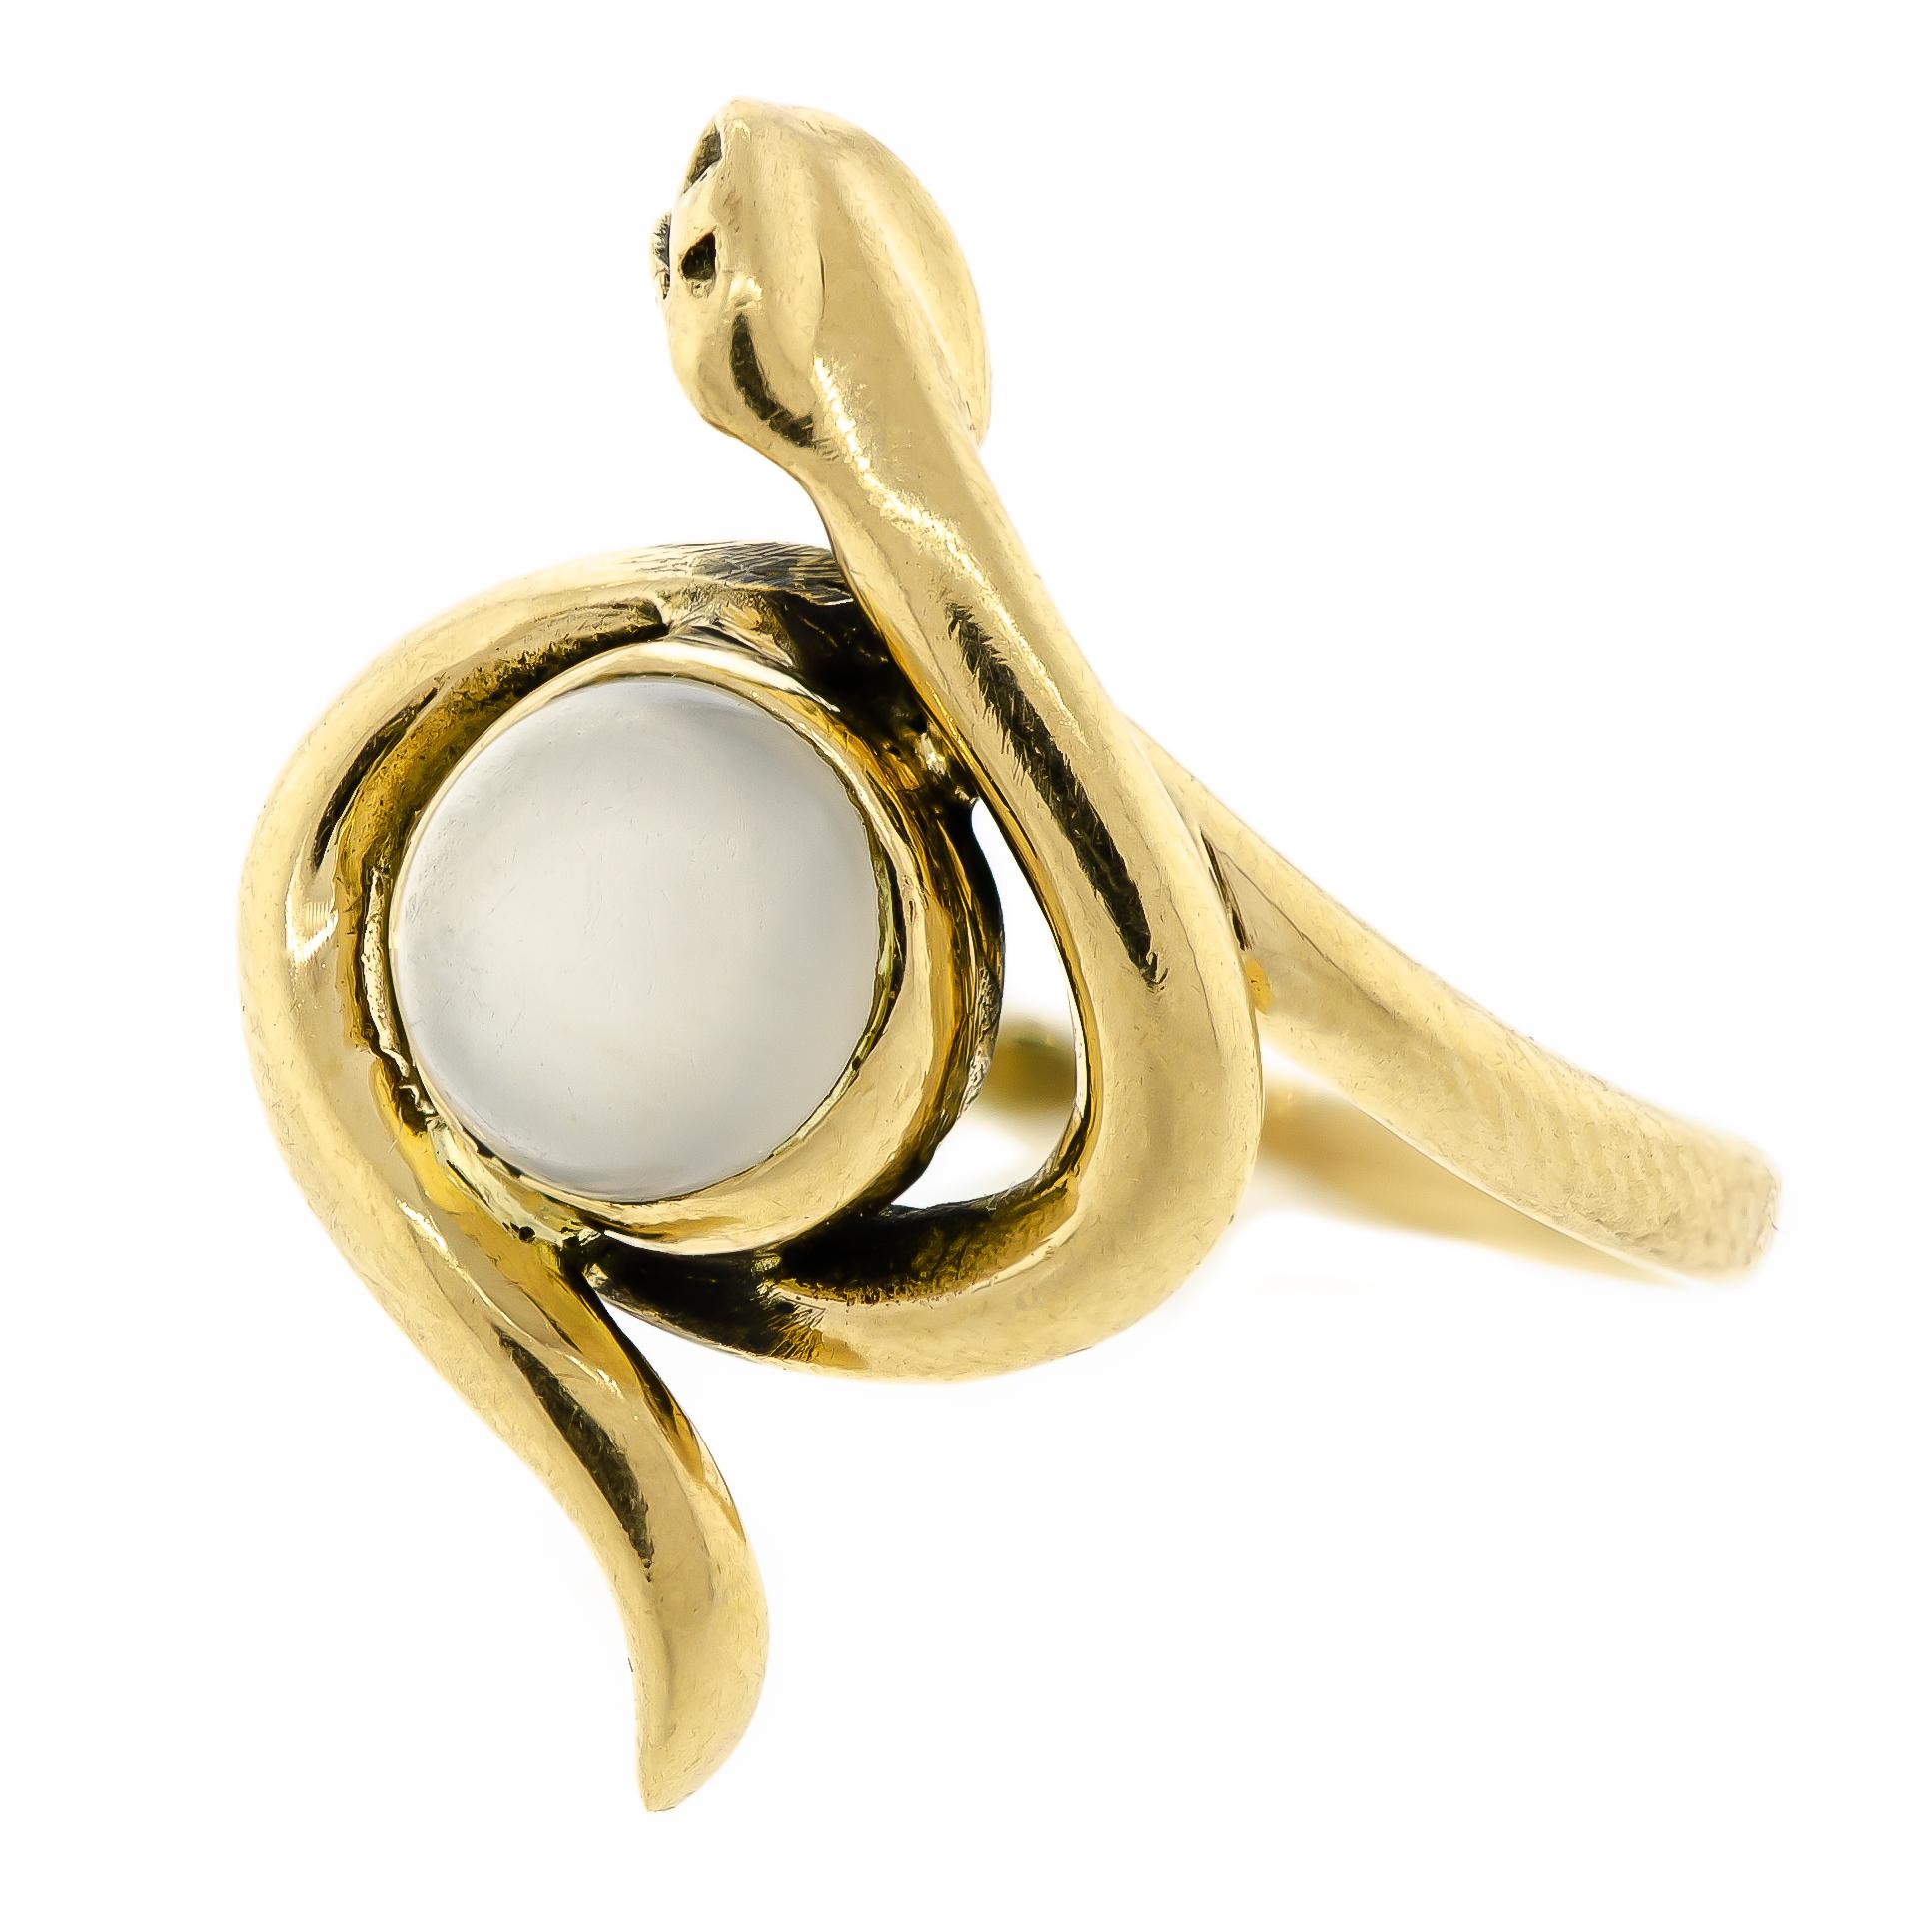 Rare vintage circa 1910 moonstone and coiled striking 14 karat yellow gold ring centrally set with one bezel set round moonstone center body of a coiled striking snake - size about 6.5 but can be sized up or down - Excellent condition.  1 3/4